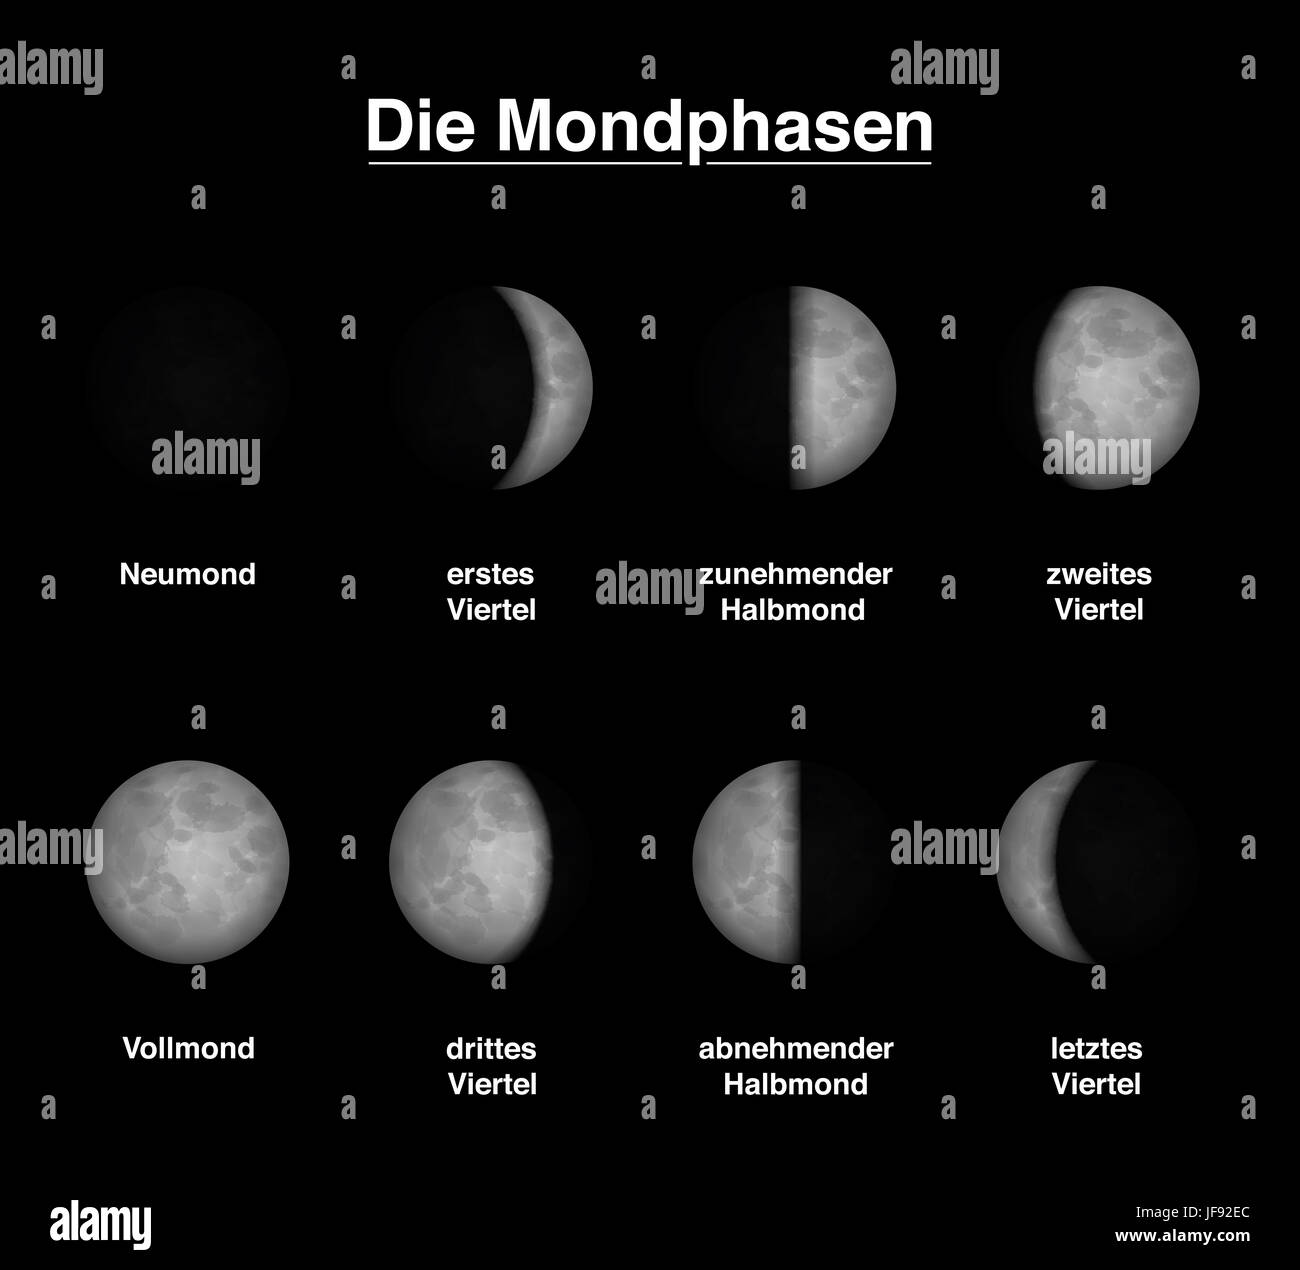 Lunar phases of the moon - GERMAN LABELING - different shapes of illuminated portions. Stock Photo